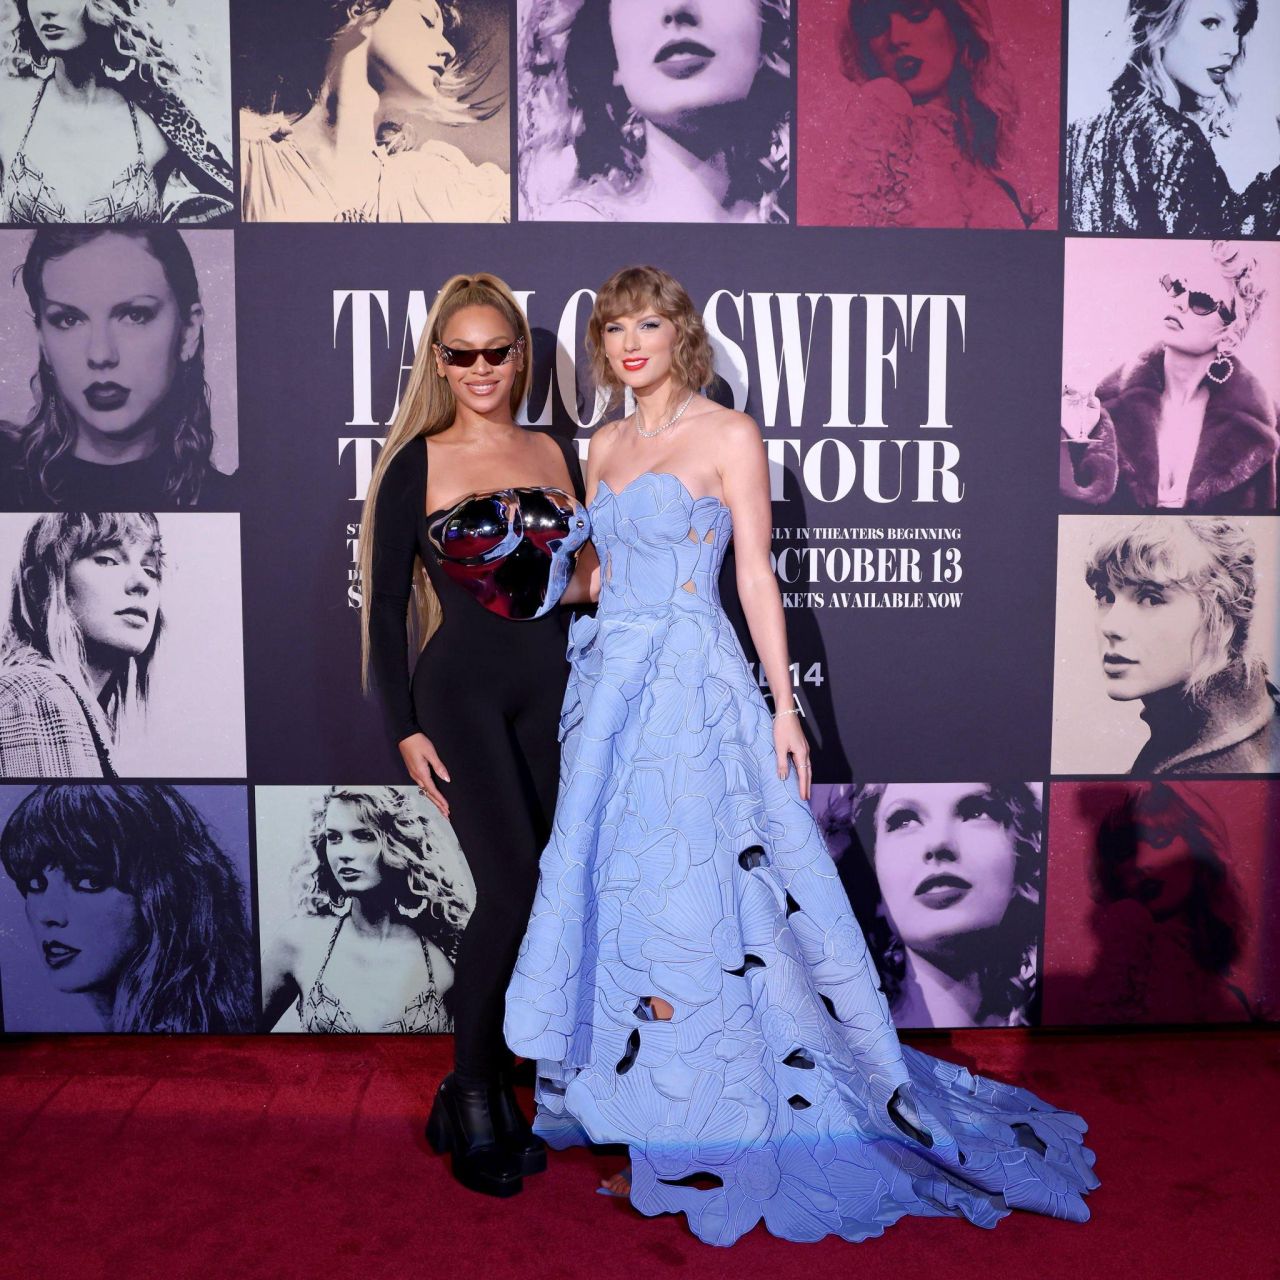 Beyonce and Taylor Swift "Taylor Swift The Eras Tour" Concert Movie